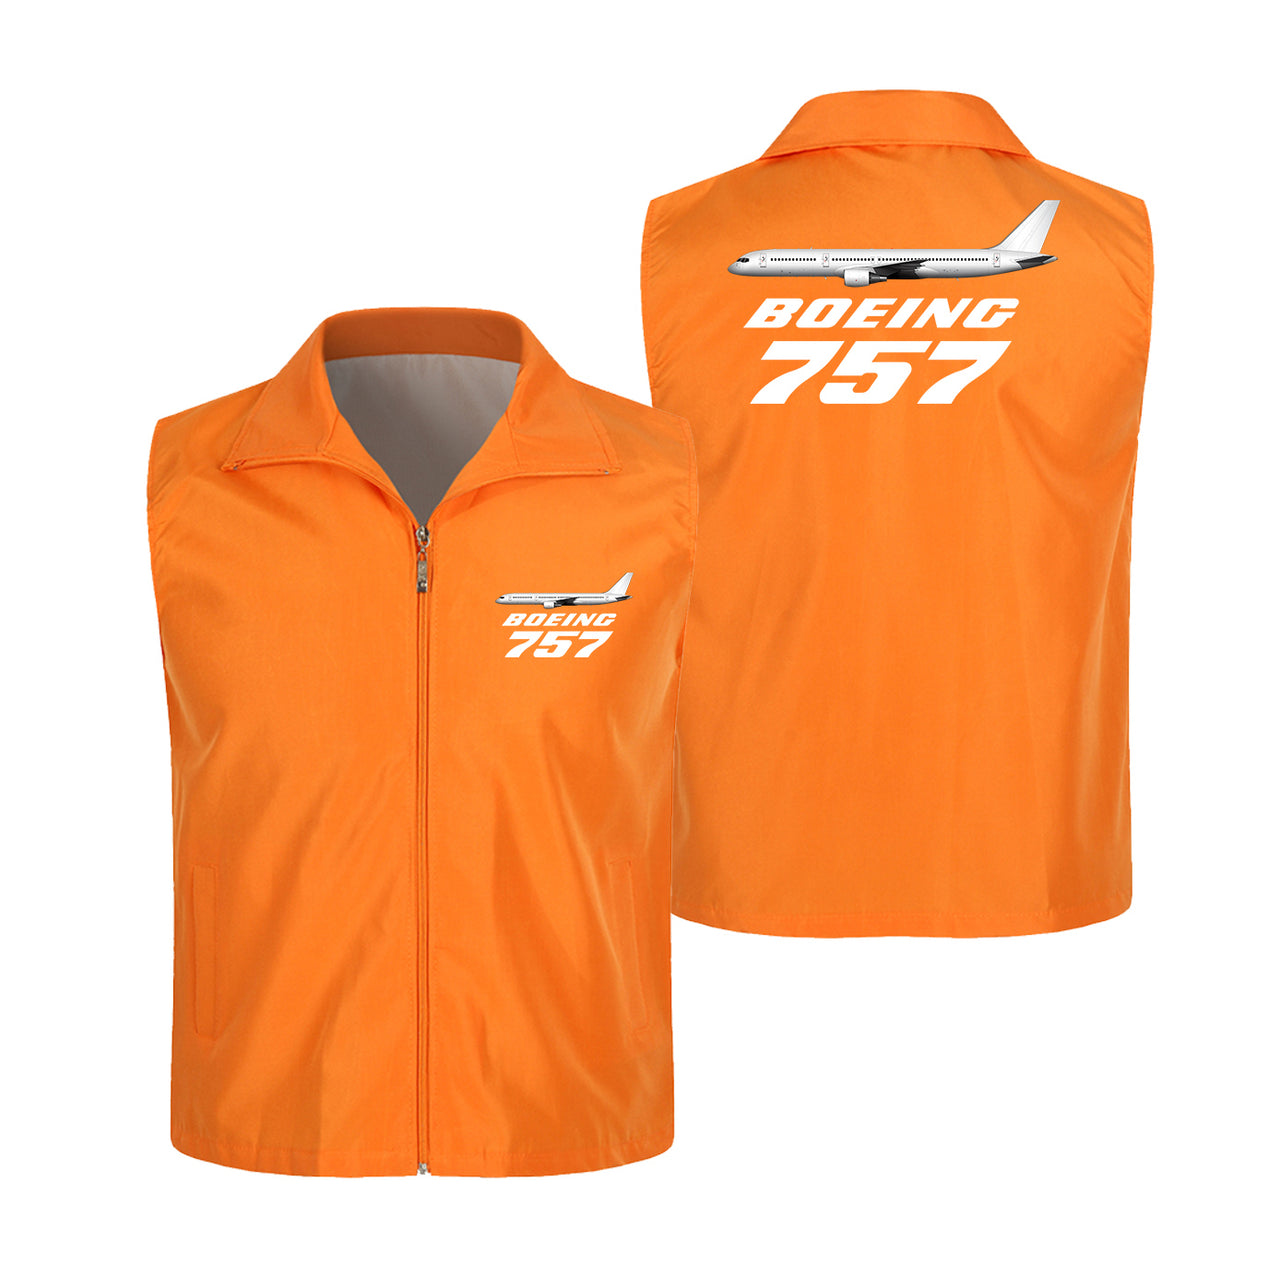 The Boeing 757 Designed Thin Style Vests